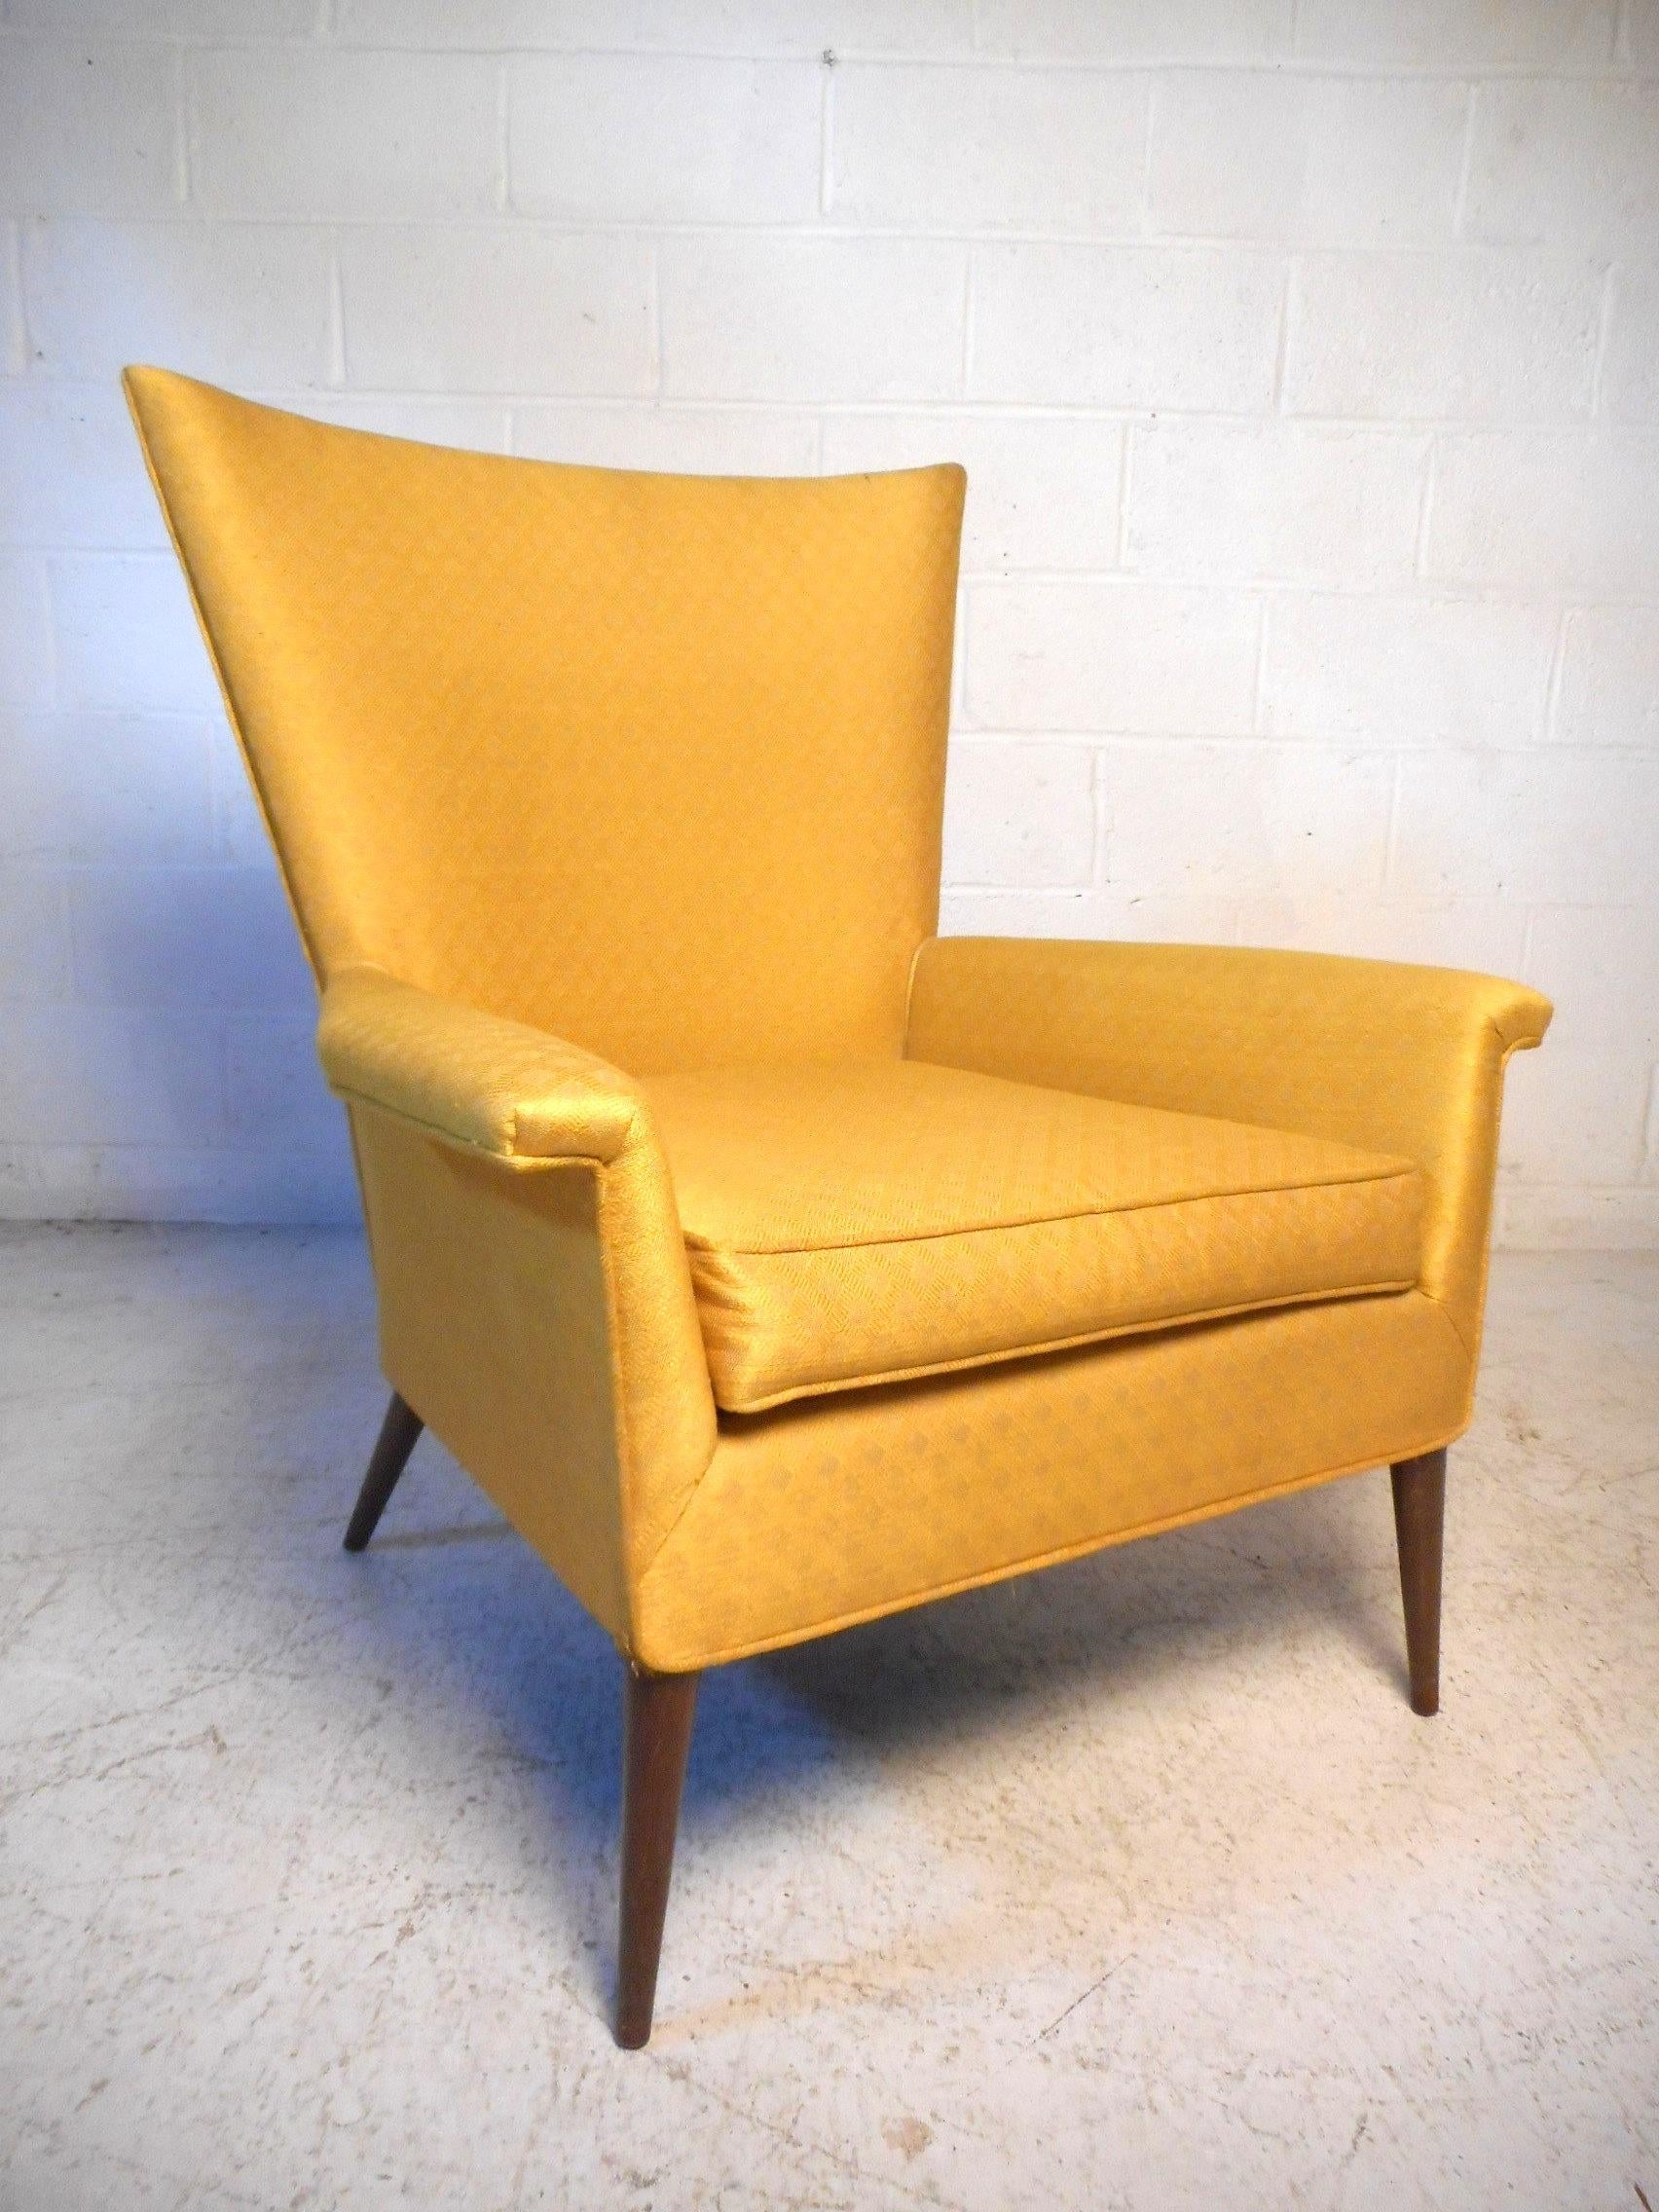 This impressive mid-century lounge chair features a tall winged back, contoured armrests, sleekly splayed and tapered wooden legs, covered with a vibrant yellow upholstery. An exceptional addition to any modern interior's seating arrangement.